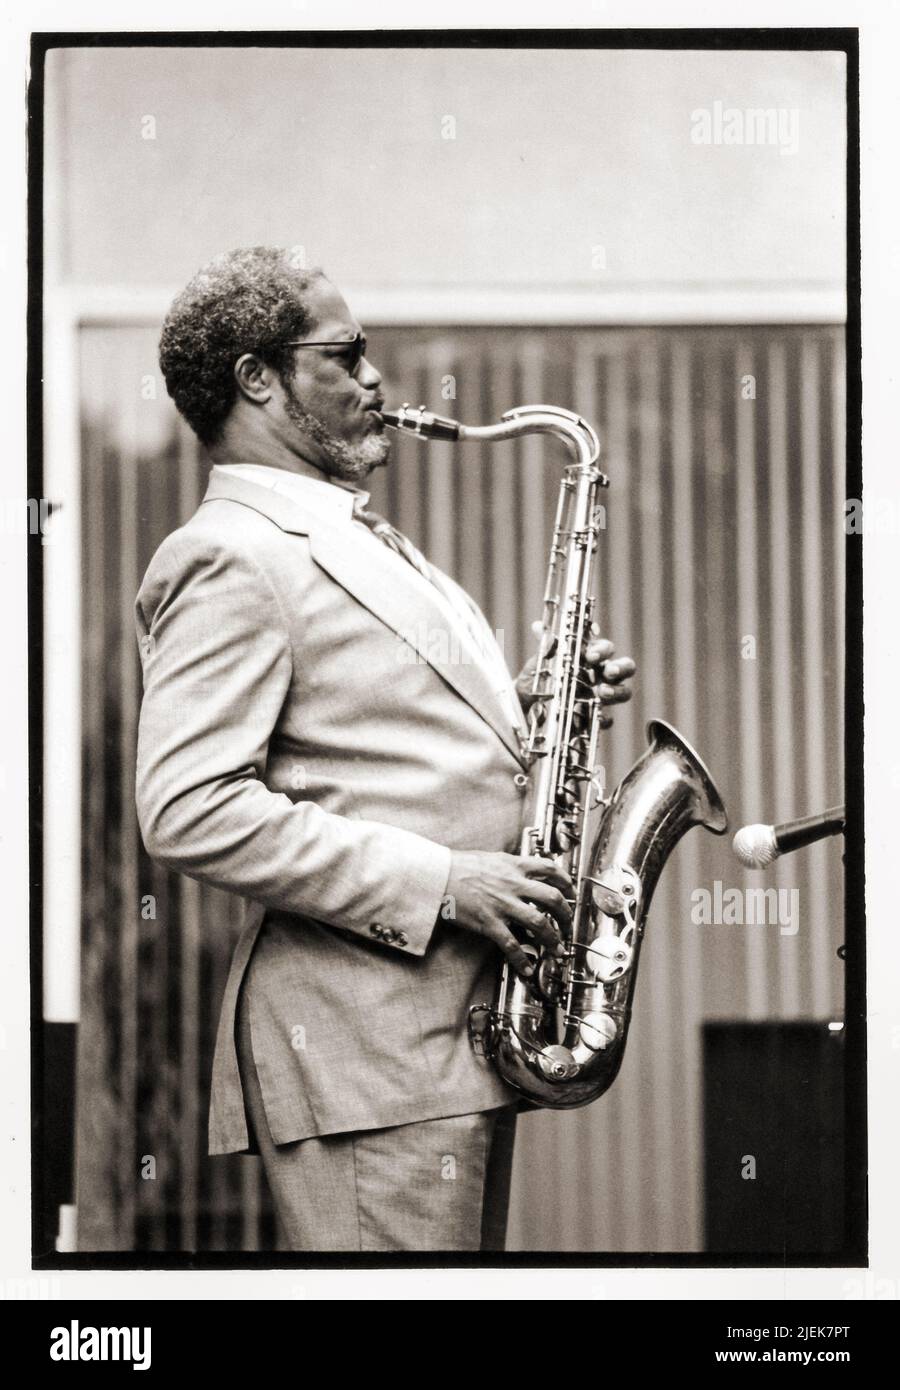 Tenor Saxophonist Clifford Jordan performs at an outdoor concert at the Brooklyn Museum In New York City. From the early 1980s. Stock Photo